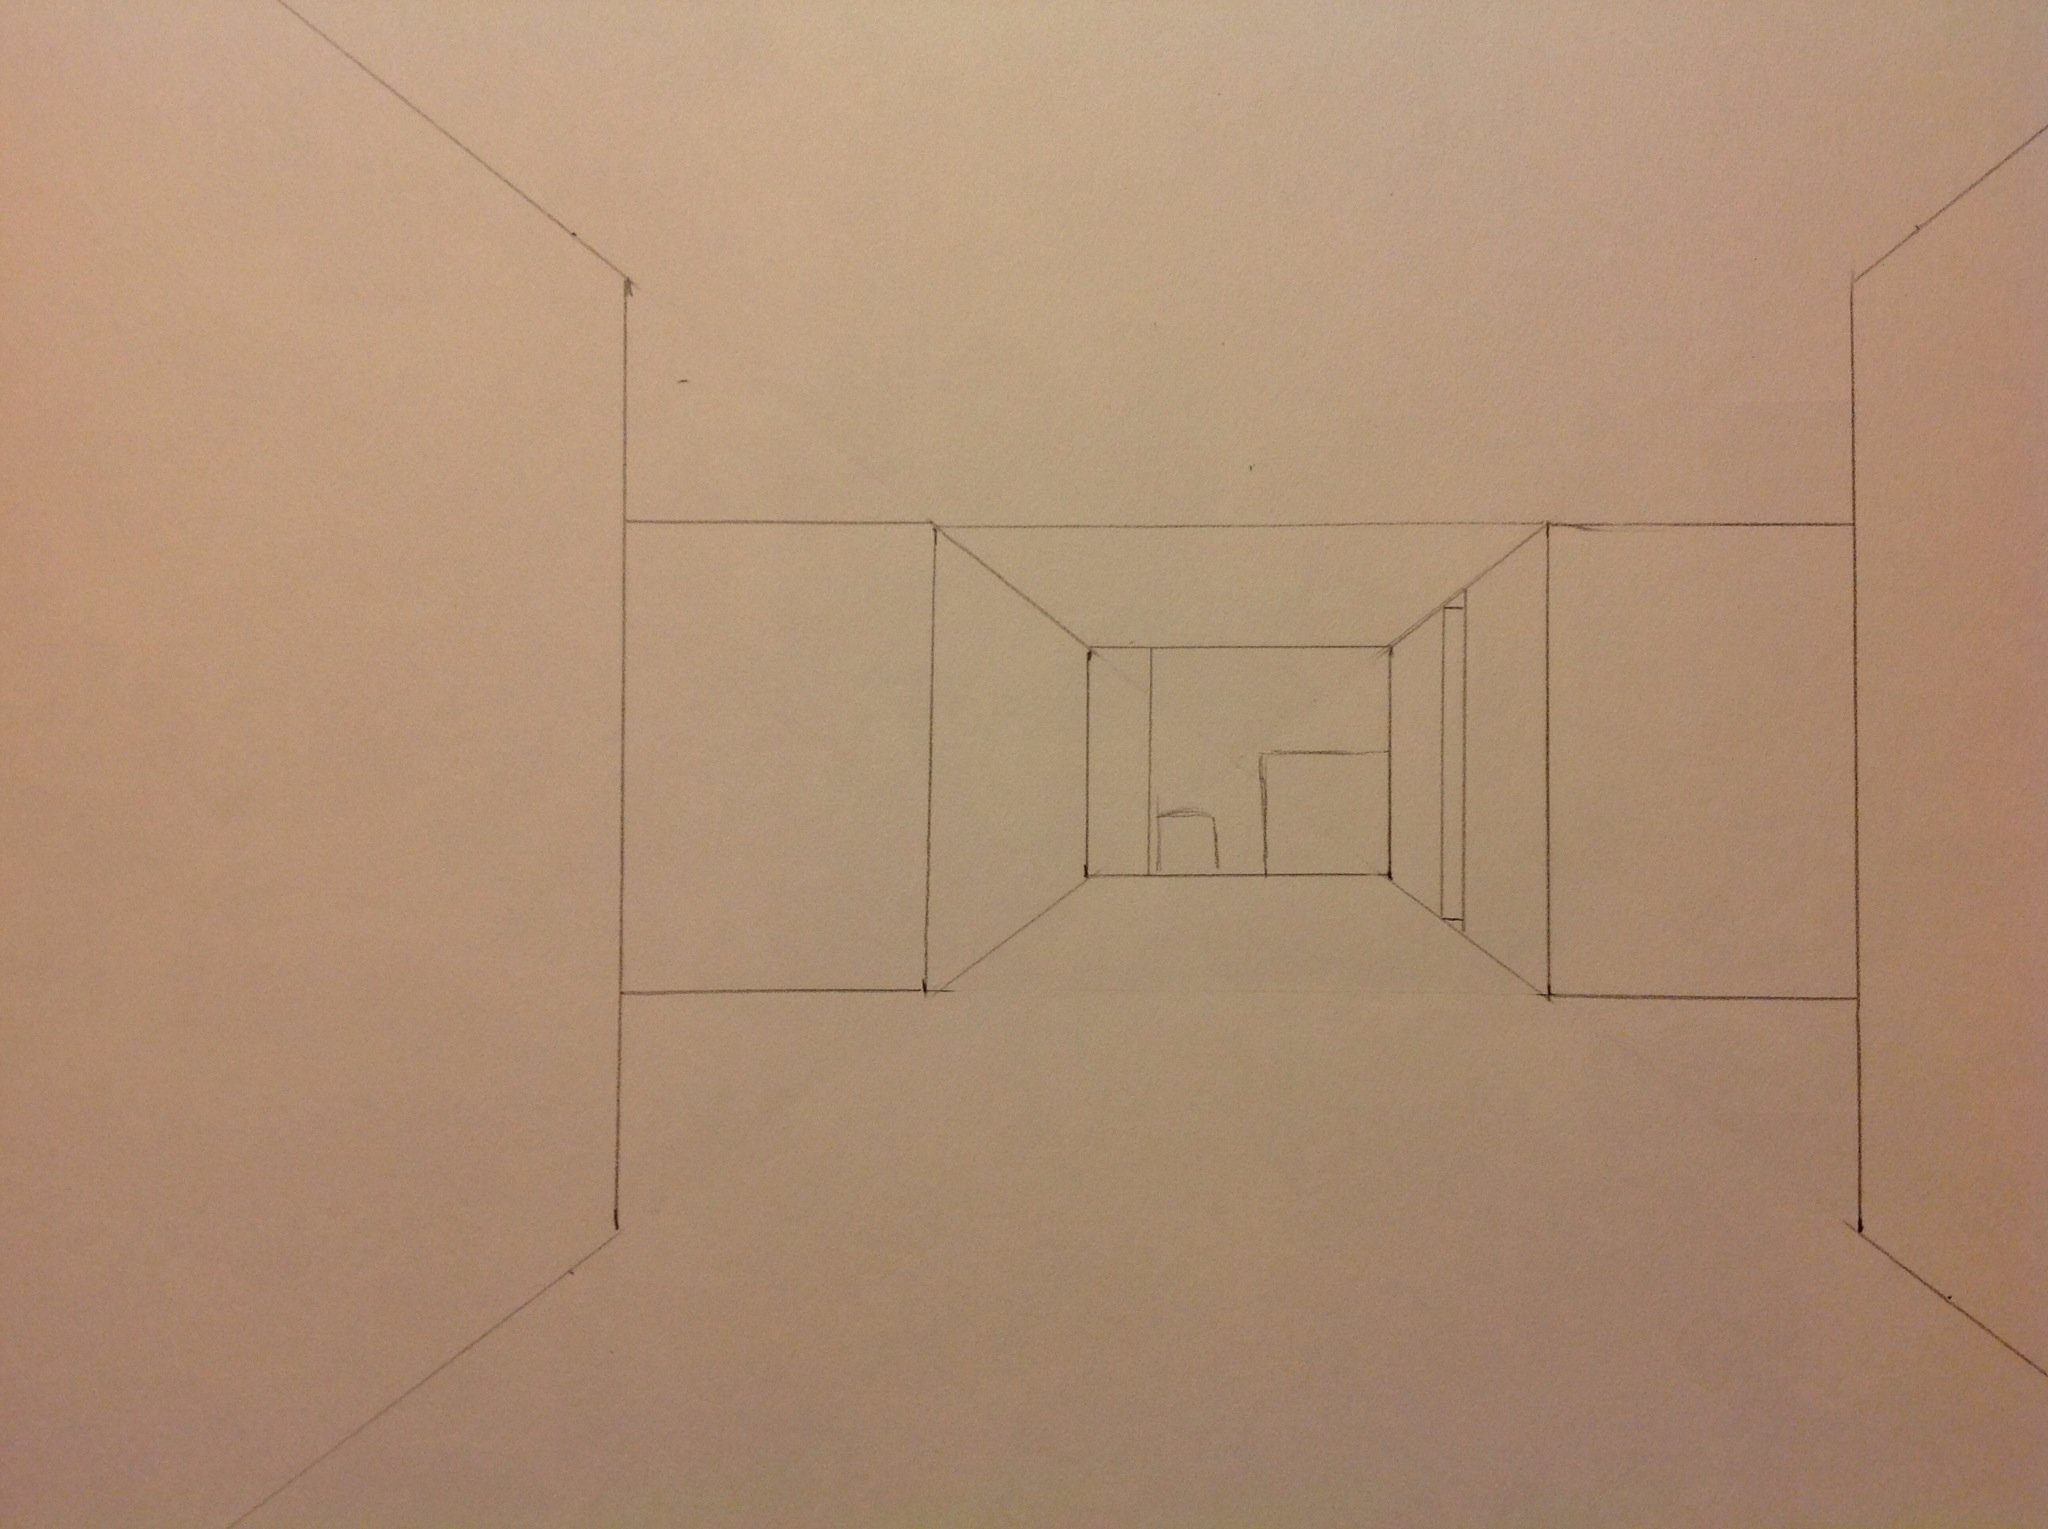 1 Point Perspective Drawing - Craft Project Ideas